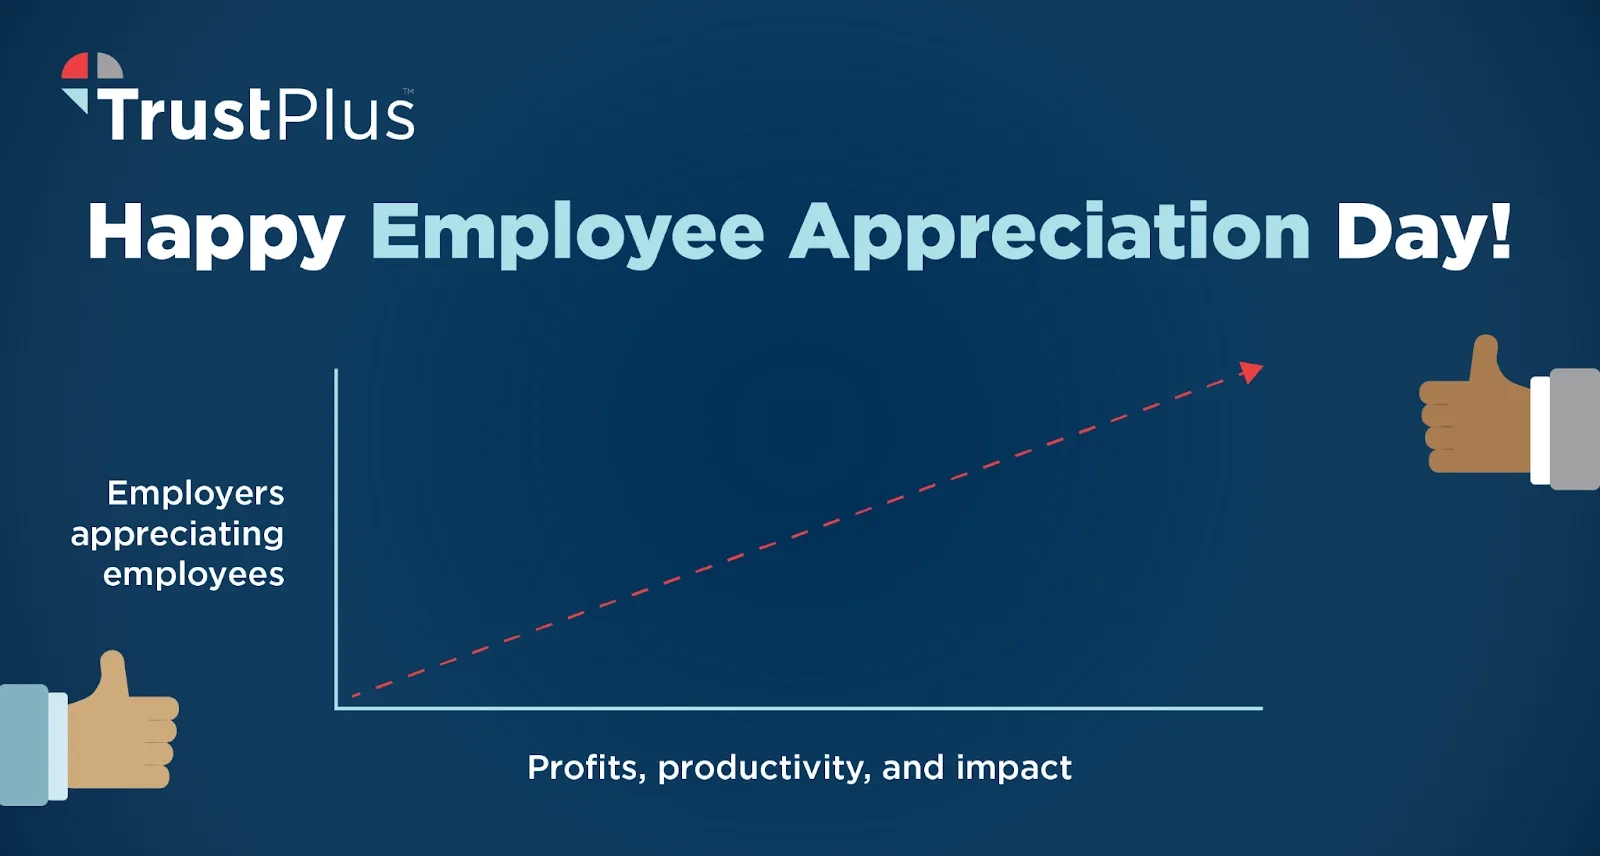 A graph demonstrates profits, productivity, and impact rising as appreciation for employees rises